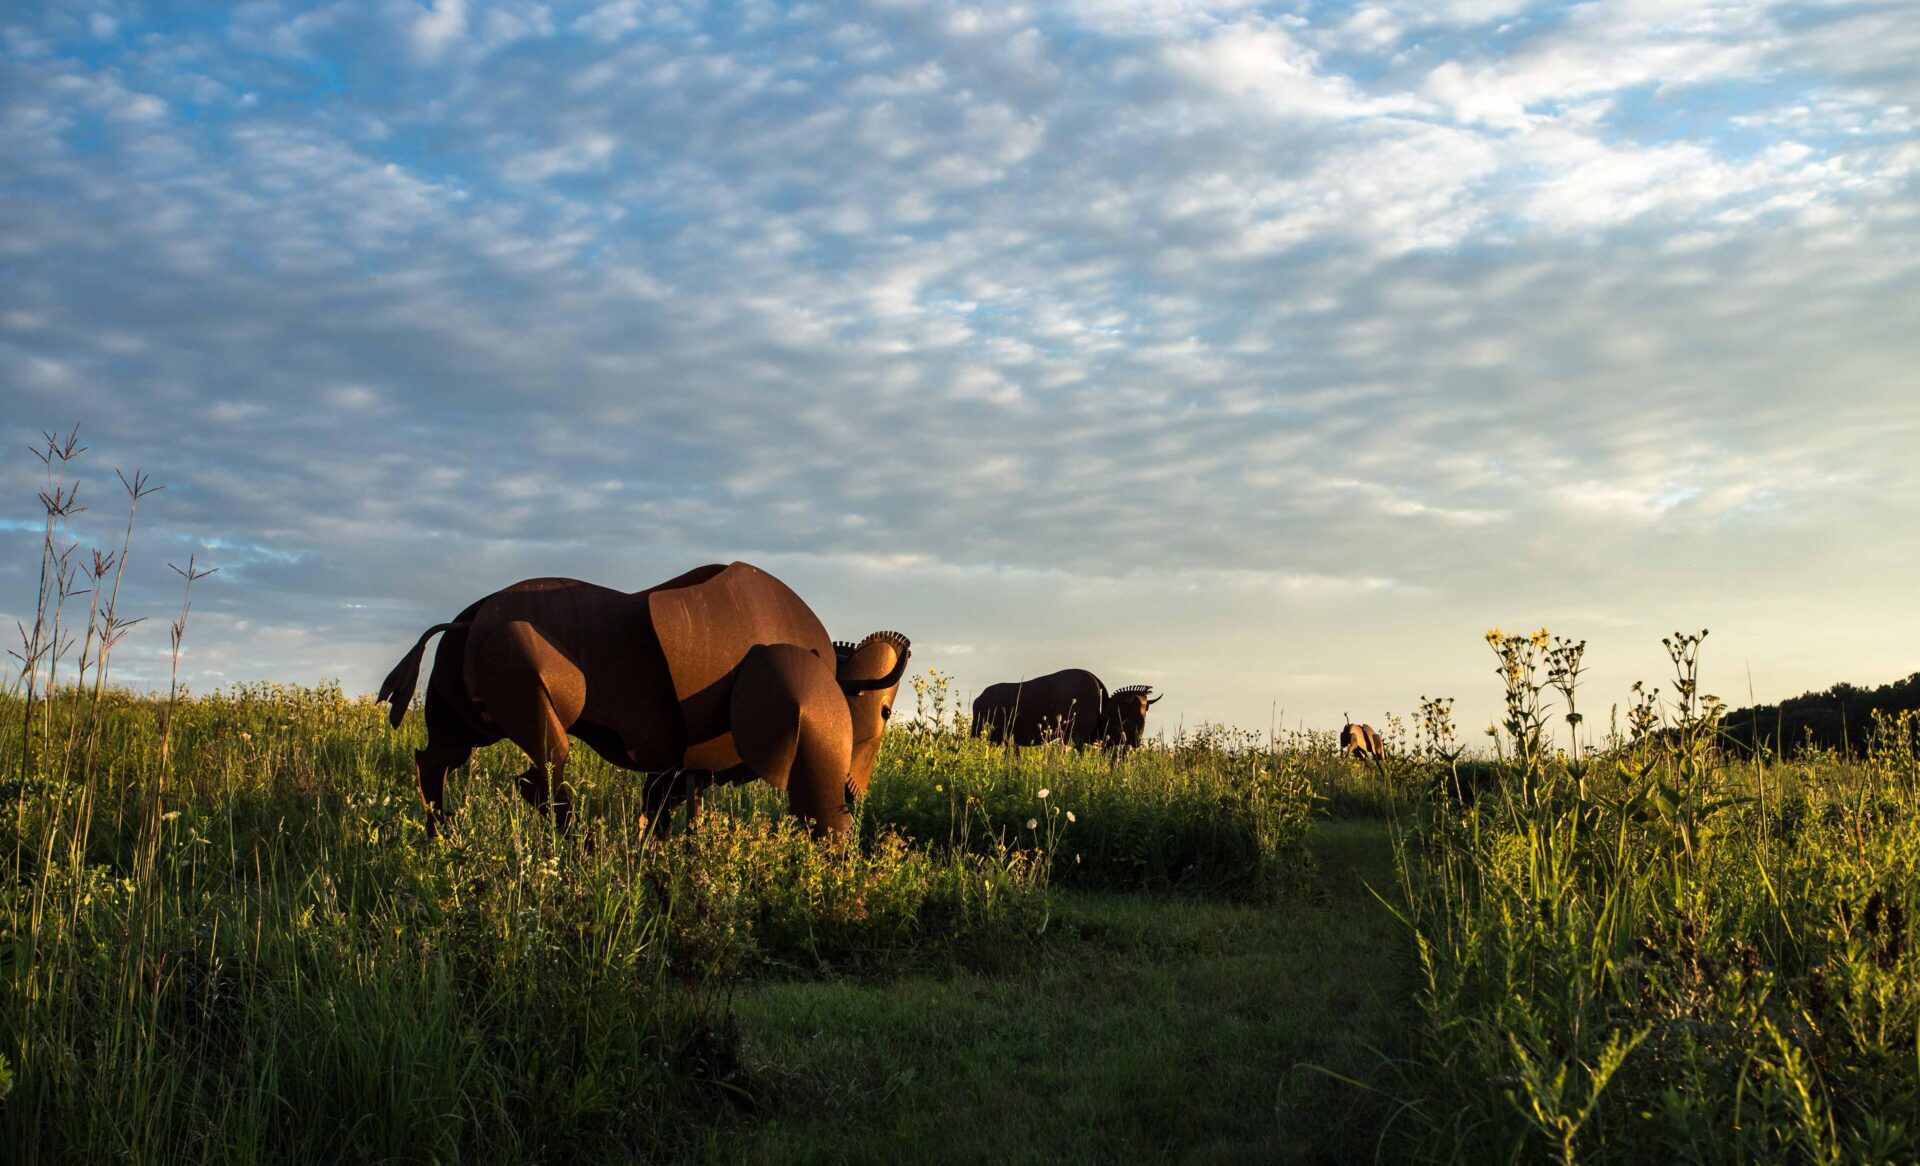 A photo taken during golden hour shows two large, metal sculptures of bison standing in a prairie.